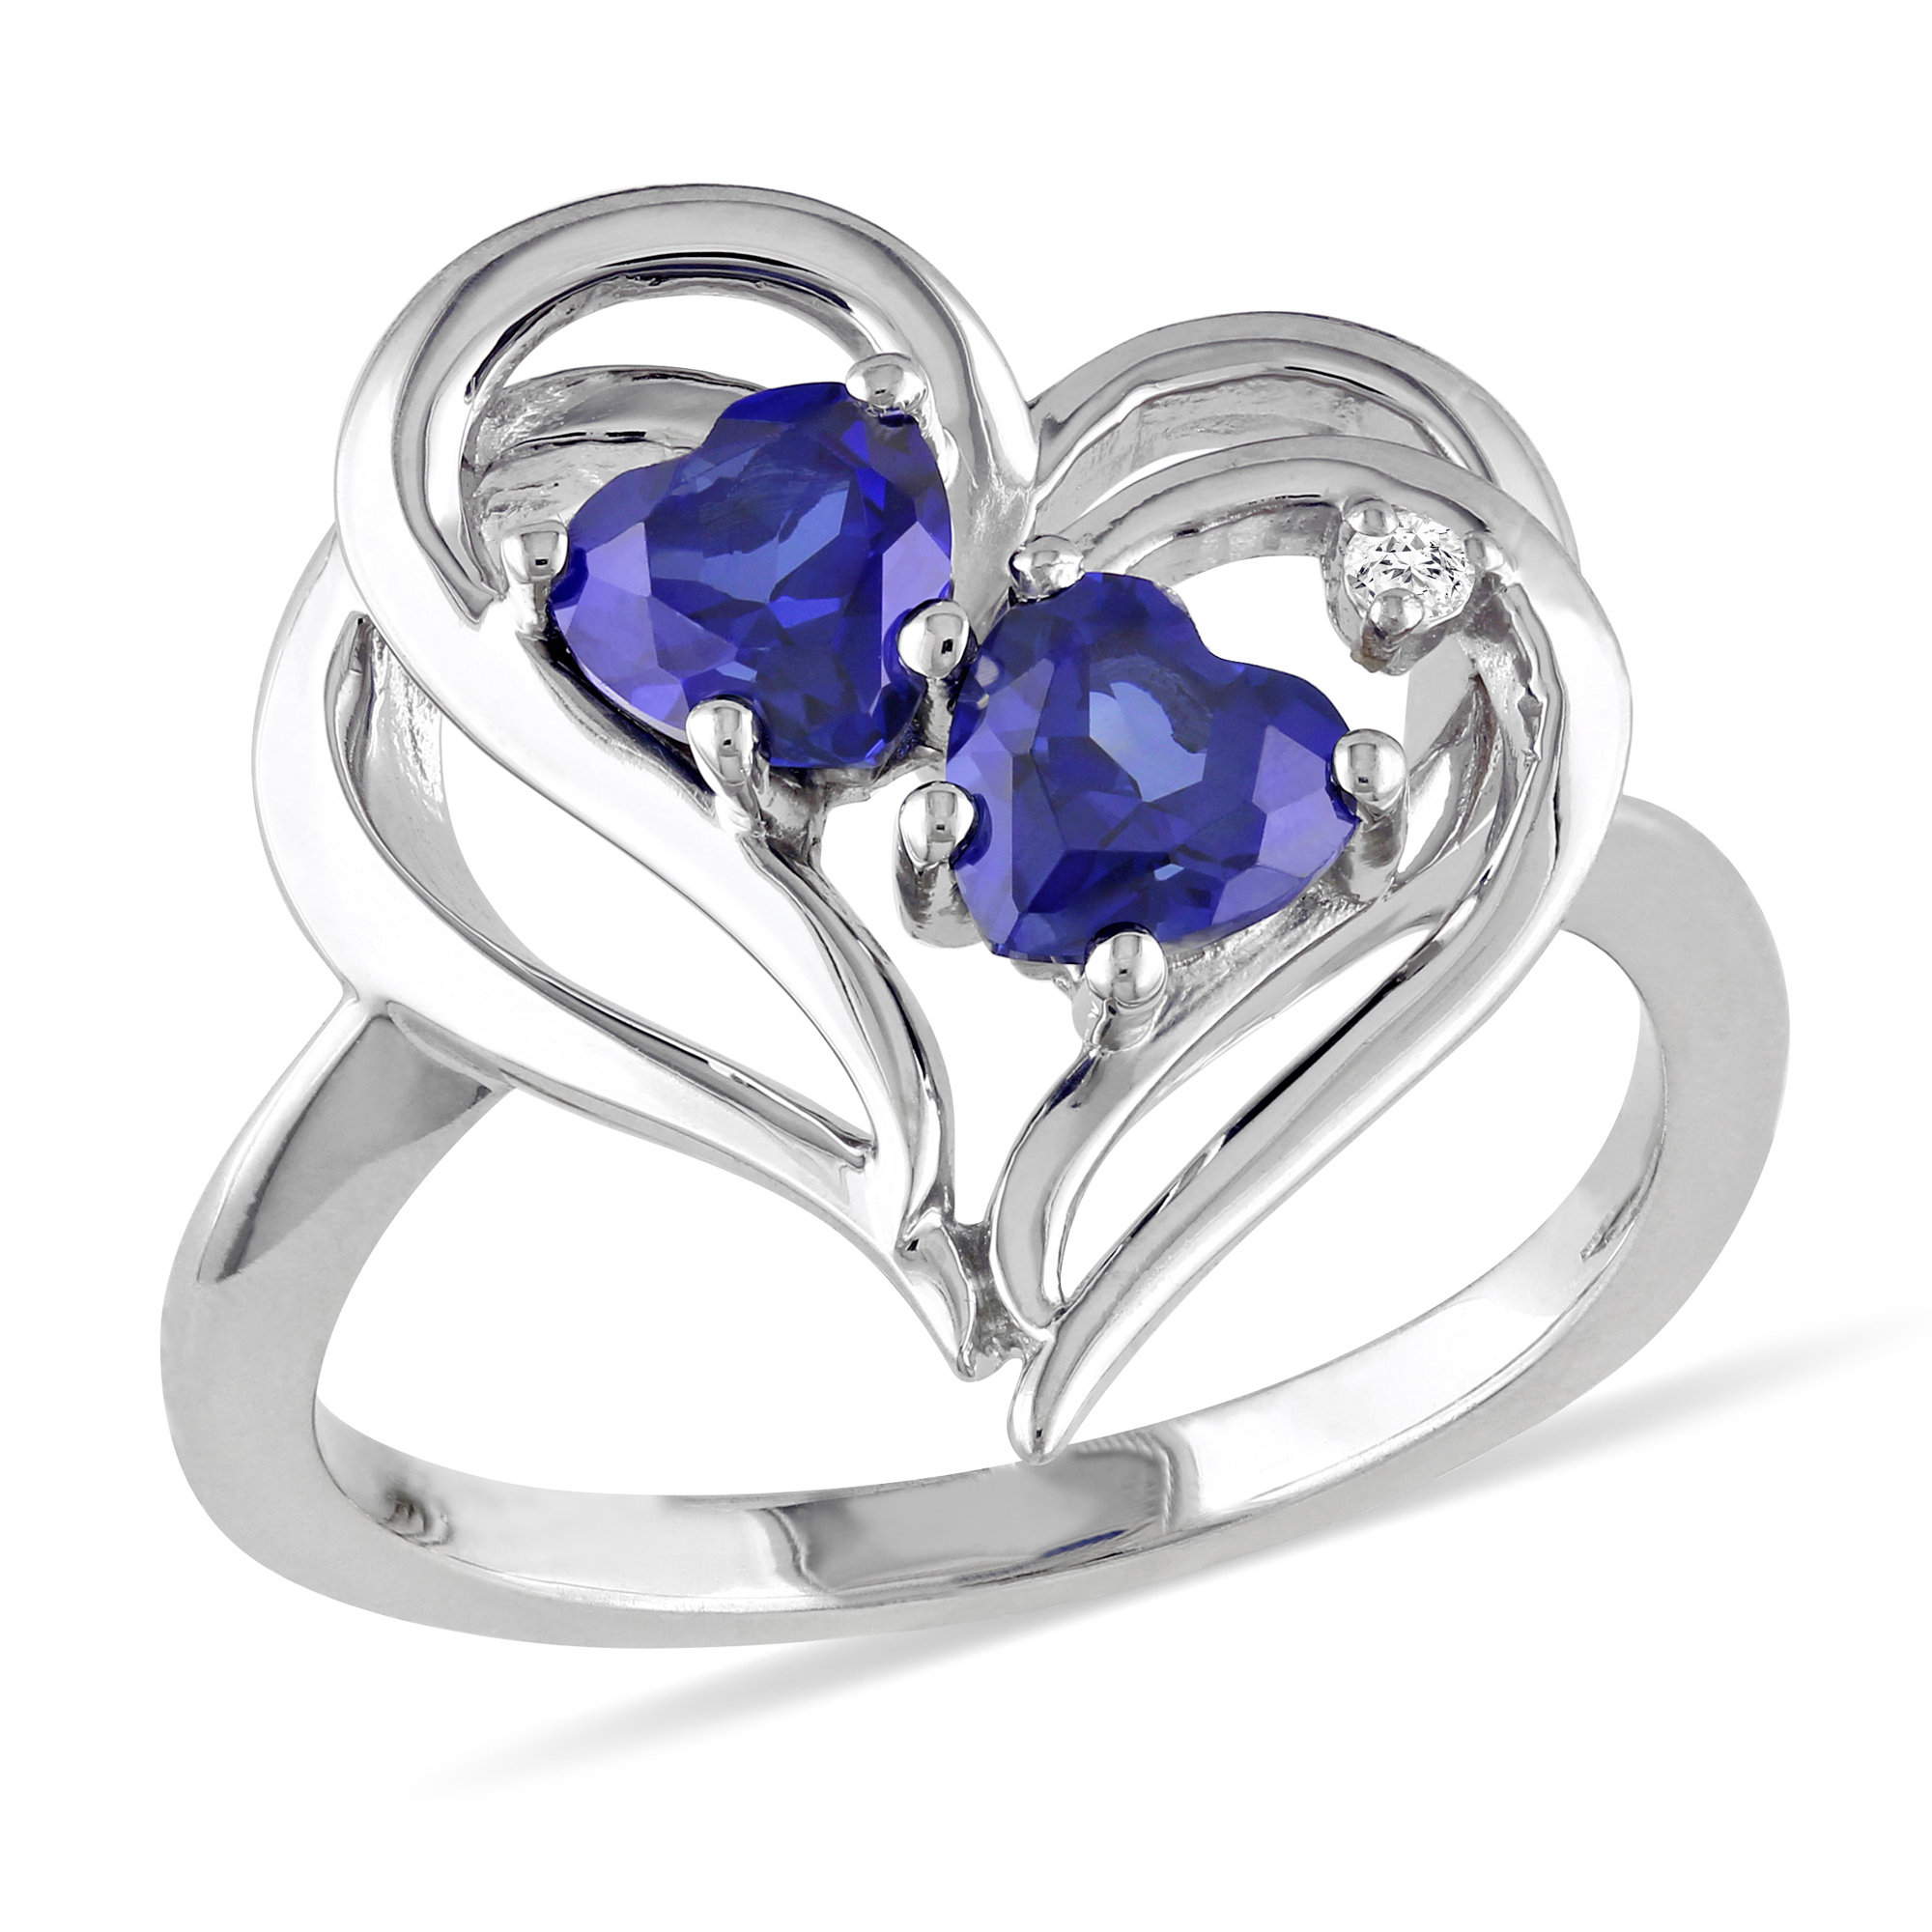 0.02 Carat T.W. Diamond and 1 1/8 Carat T.G.W. Created Blue Sapphire Fashion Ring in Sterling Silver GH I3